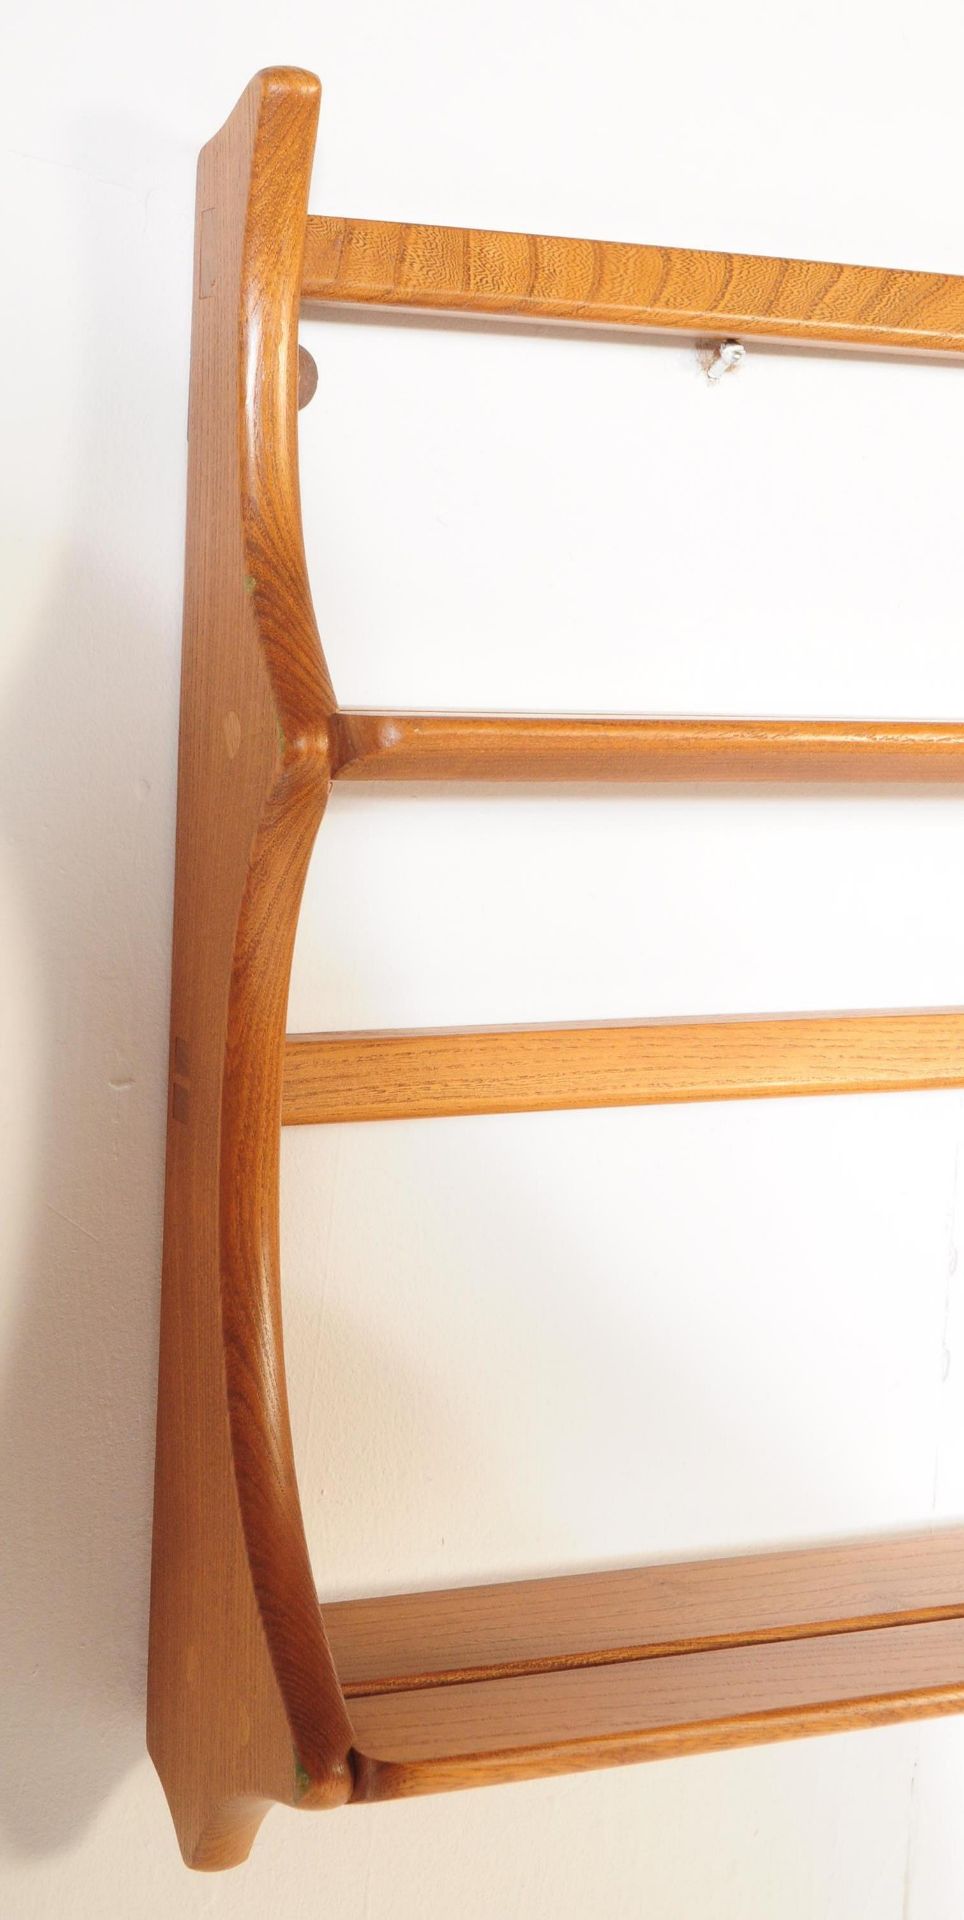 ERCOL - GOLDEN DAWN - MID CENTURY HANGING PLATE RACK - Image 3 of 3